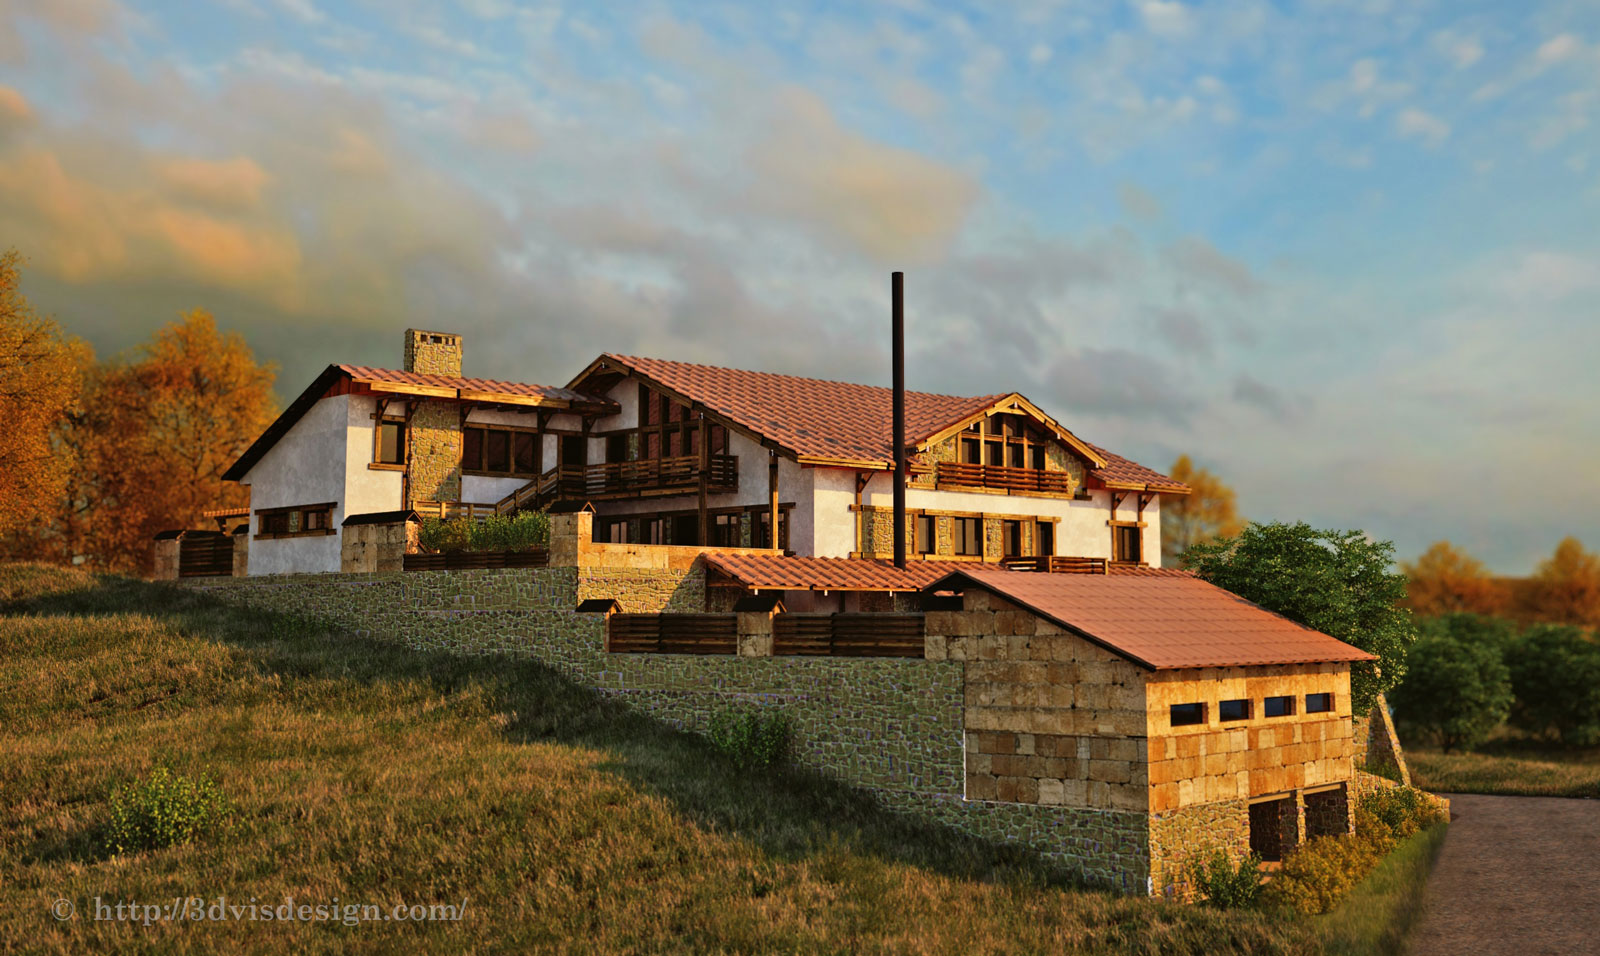 Photorealistic 3D rendering of a country house.